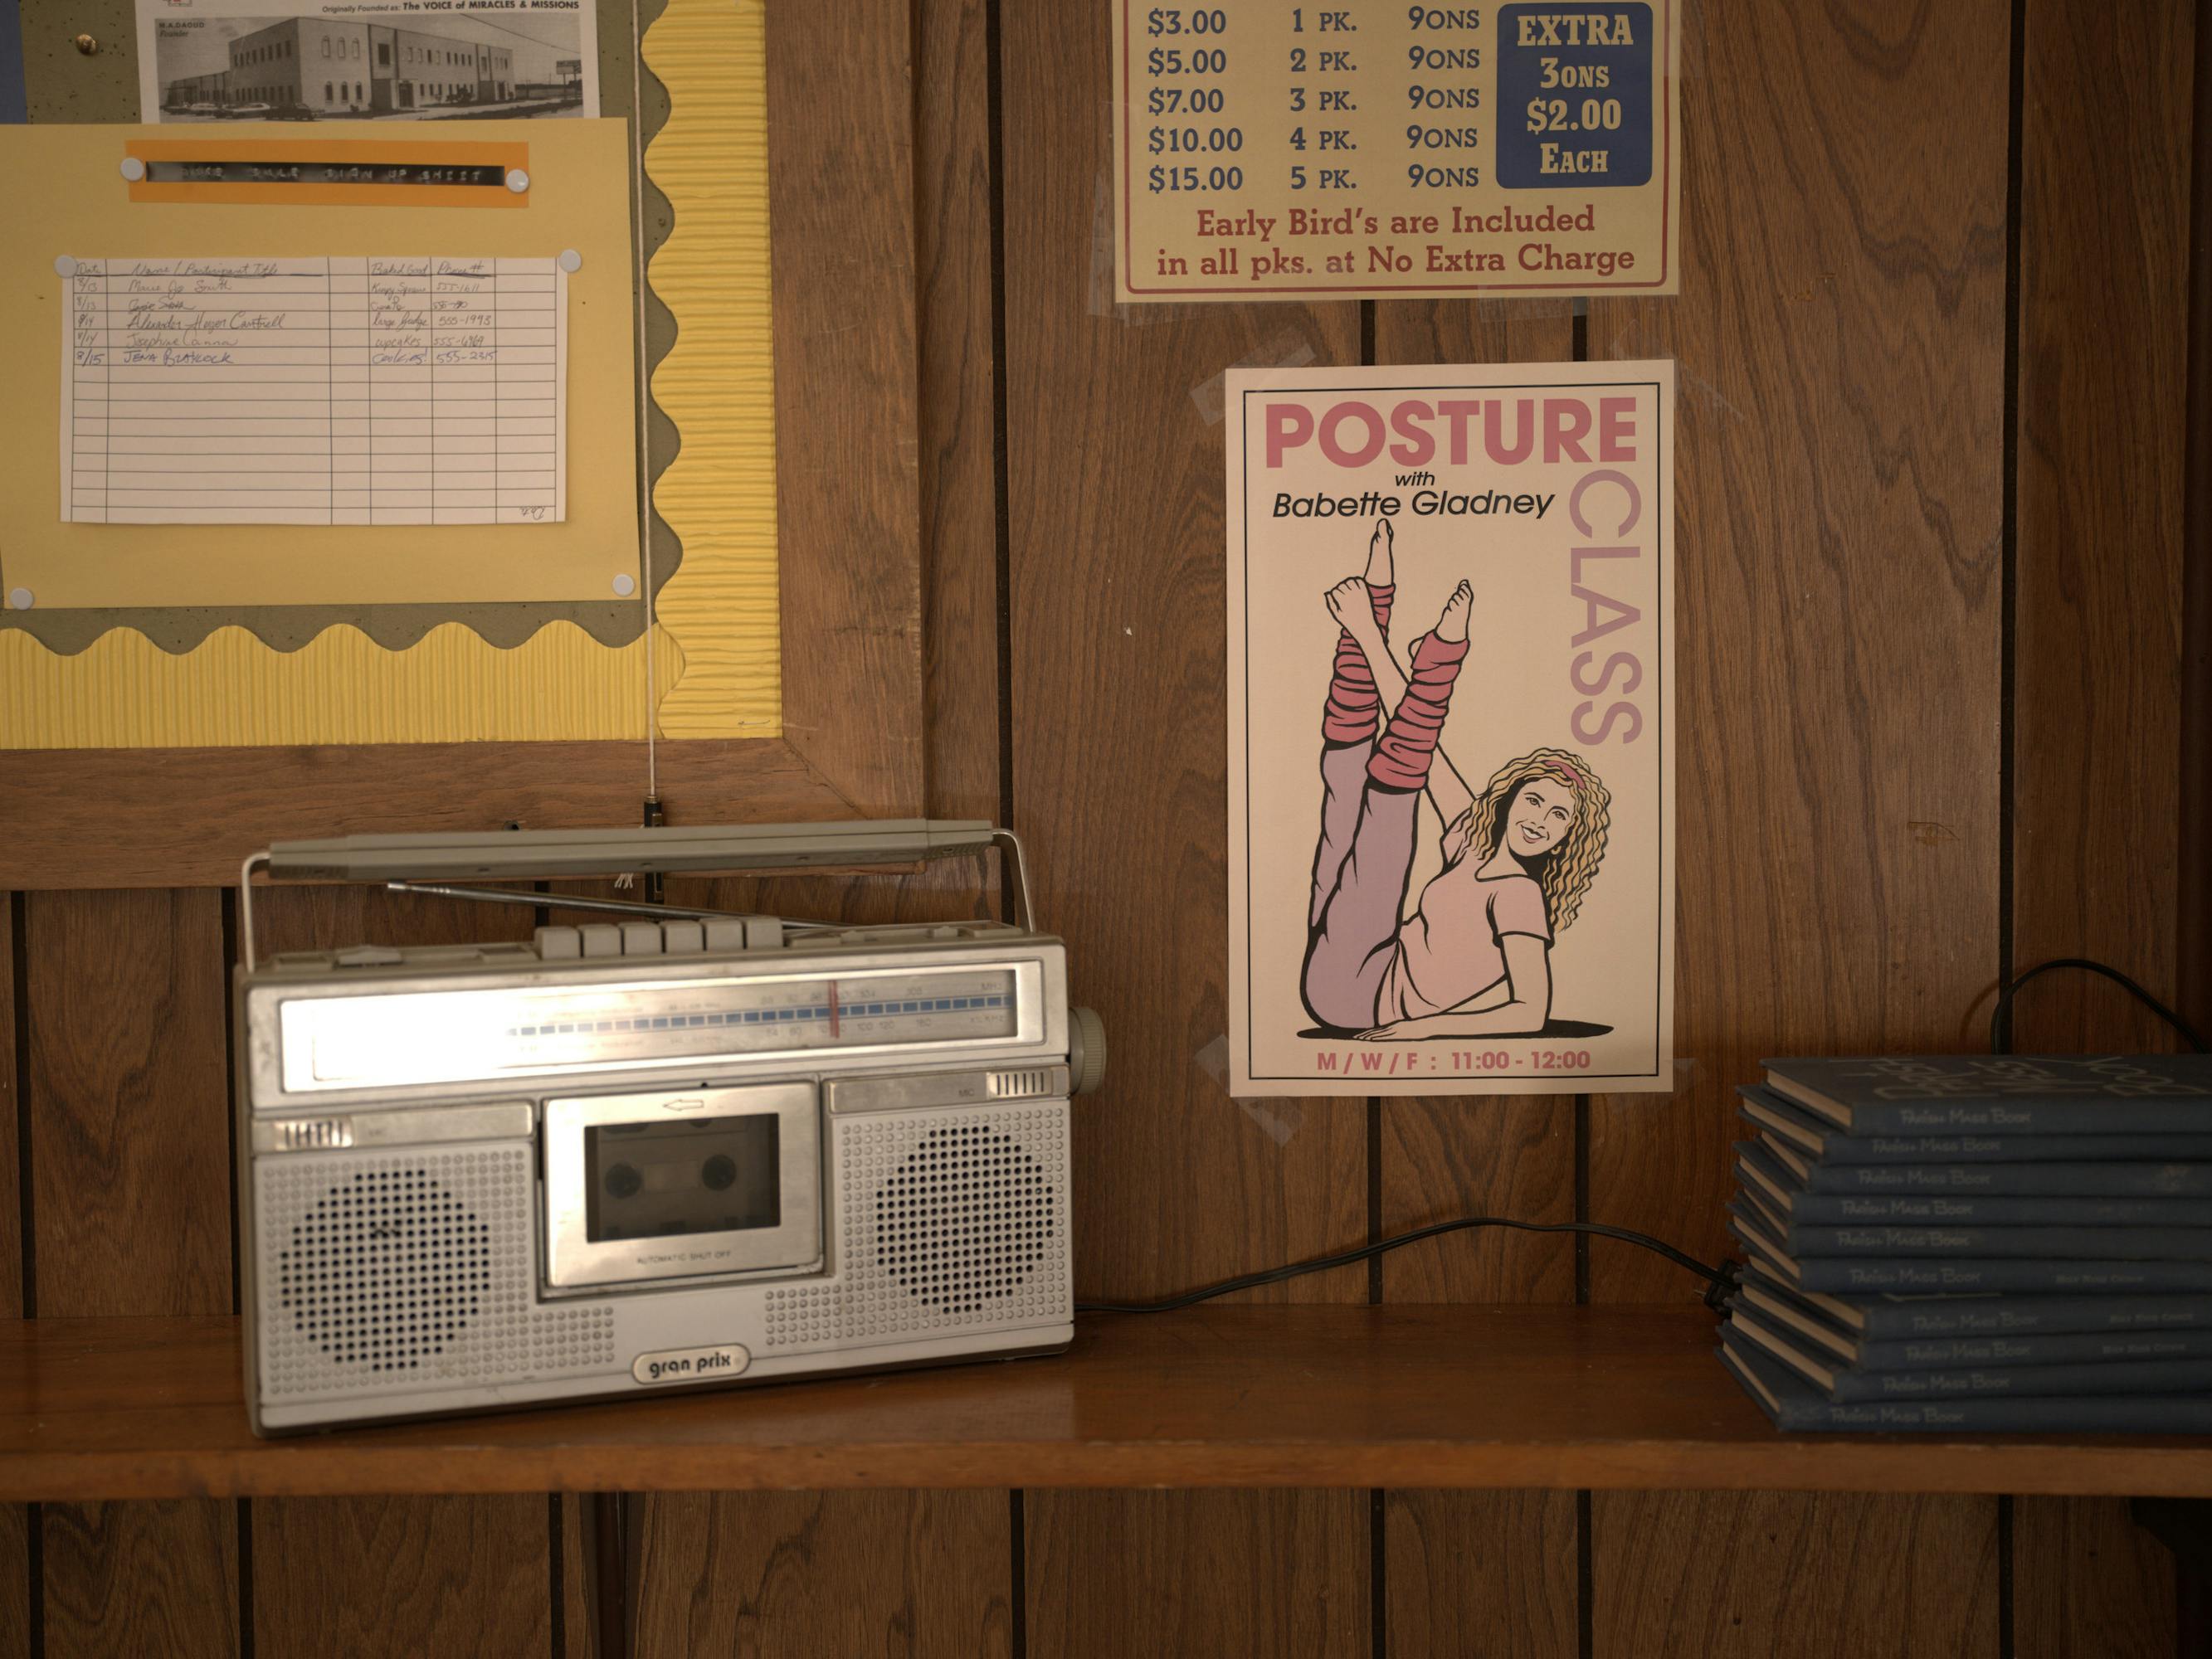 A stereo in an aerobics classroom with some posters and flyers on the wall.